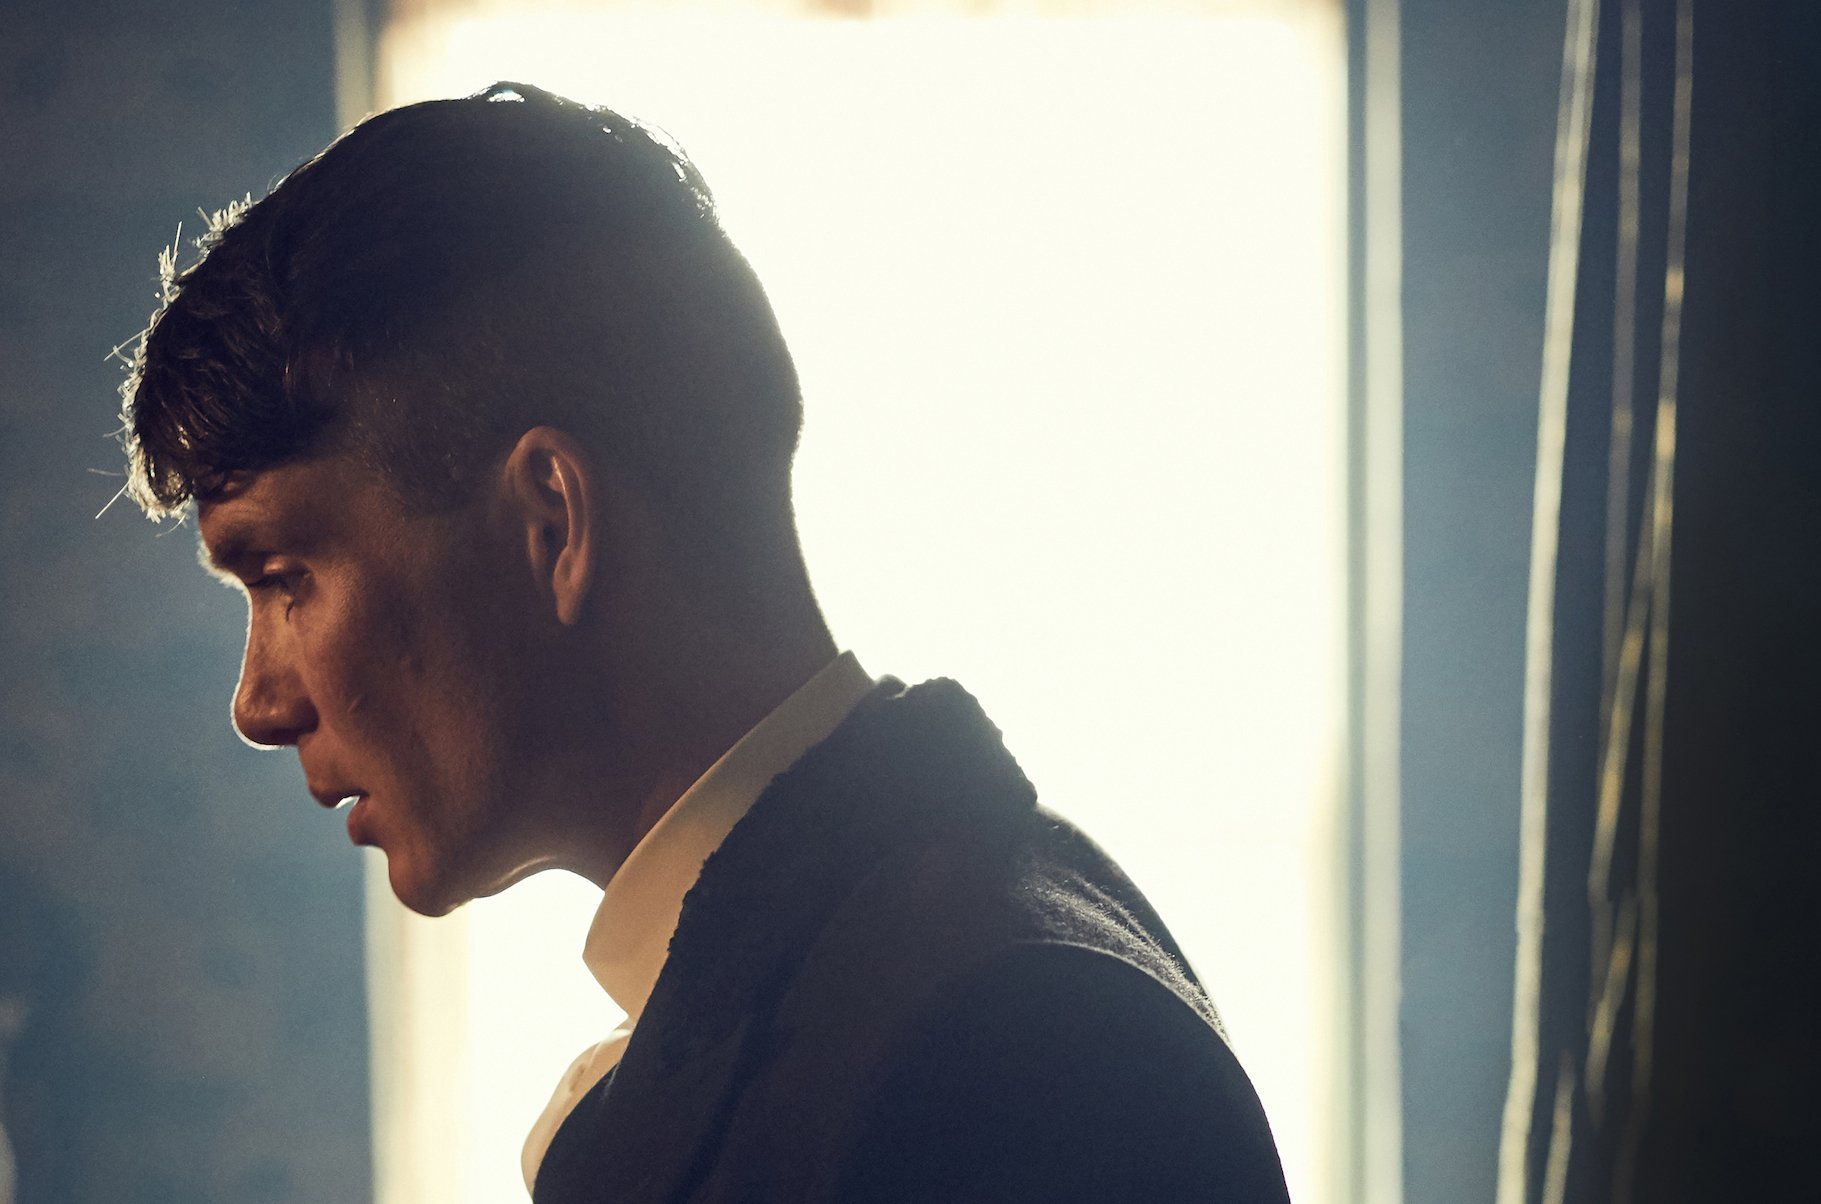 Cillian Murphy, seen in profile with window behind him, as Thomas Shelby in 'Peaky Blinders' 